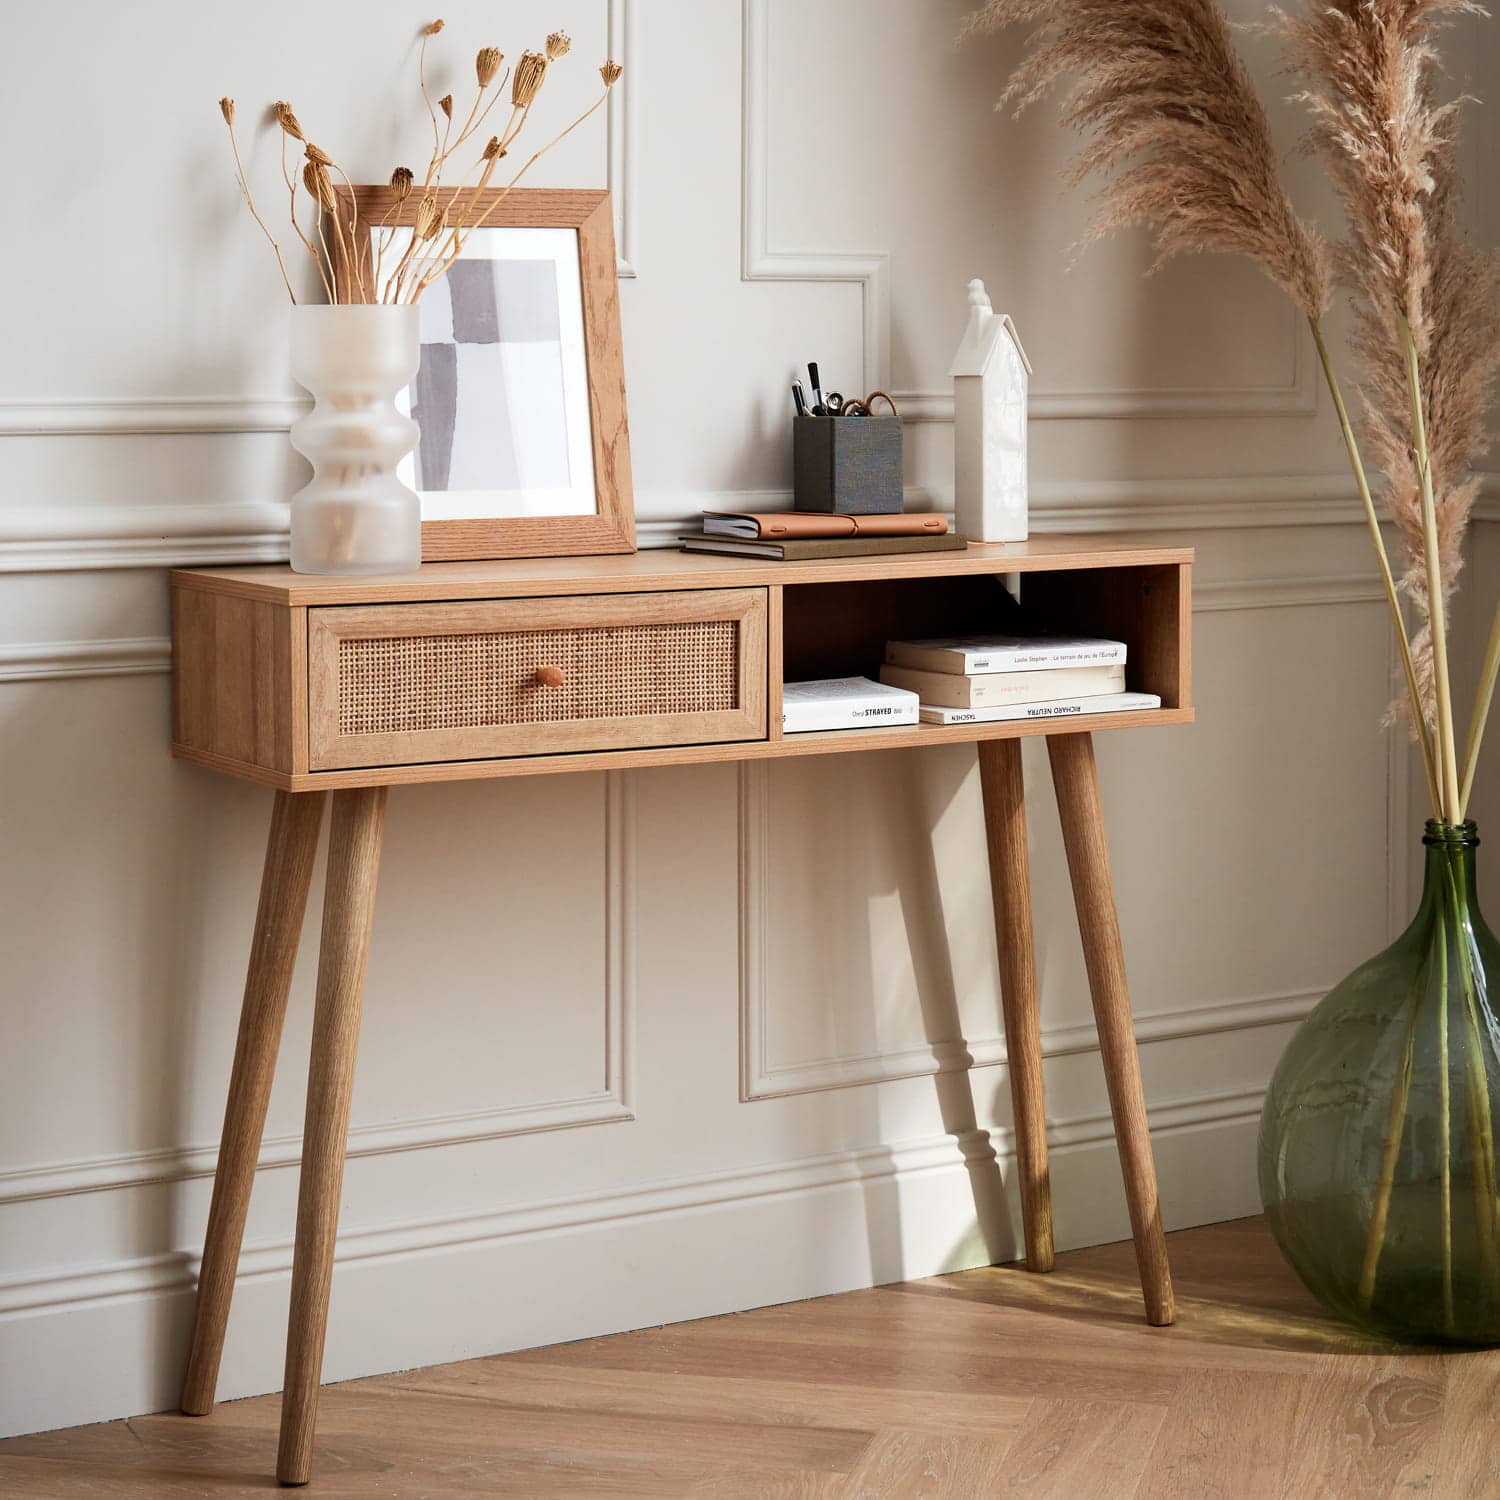 rattan sideboard, placed in living room for storage, has two drawers, wooden flooring